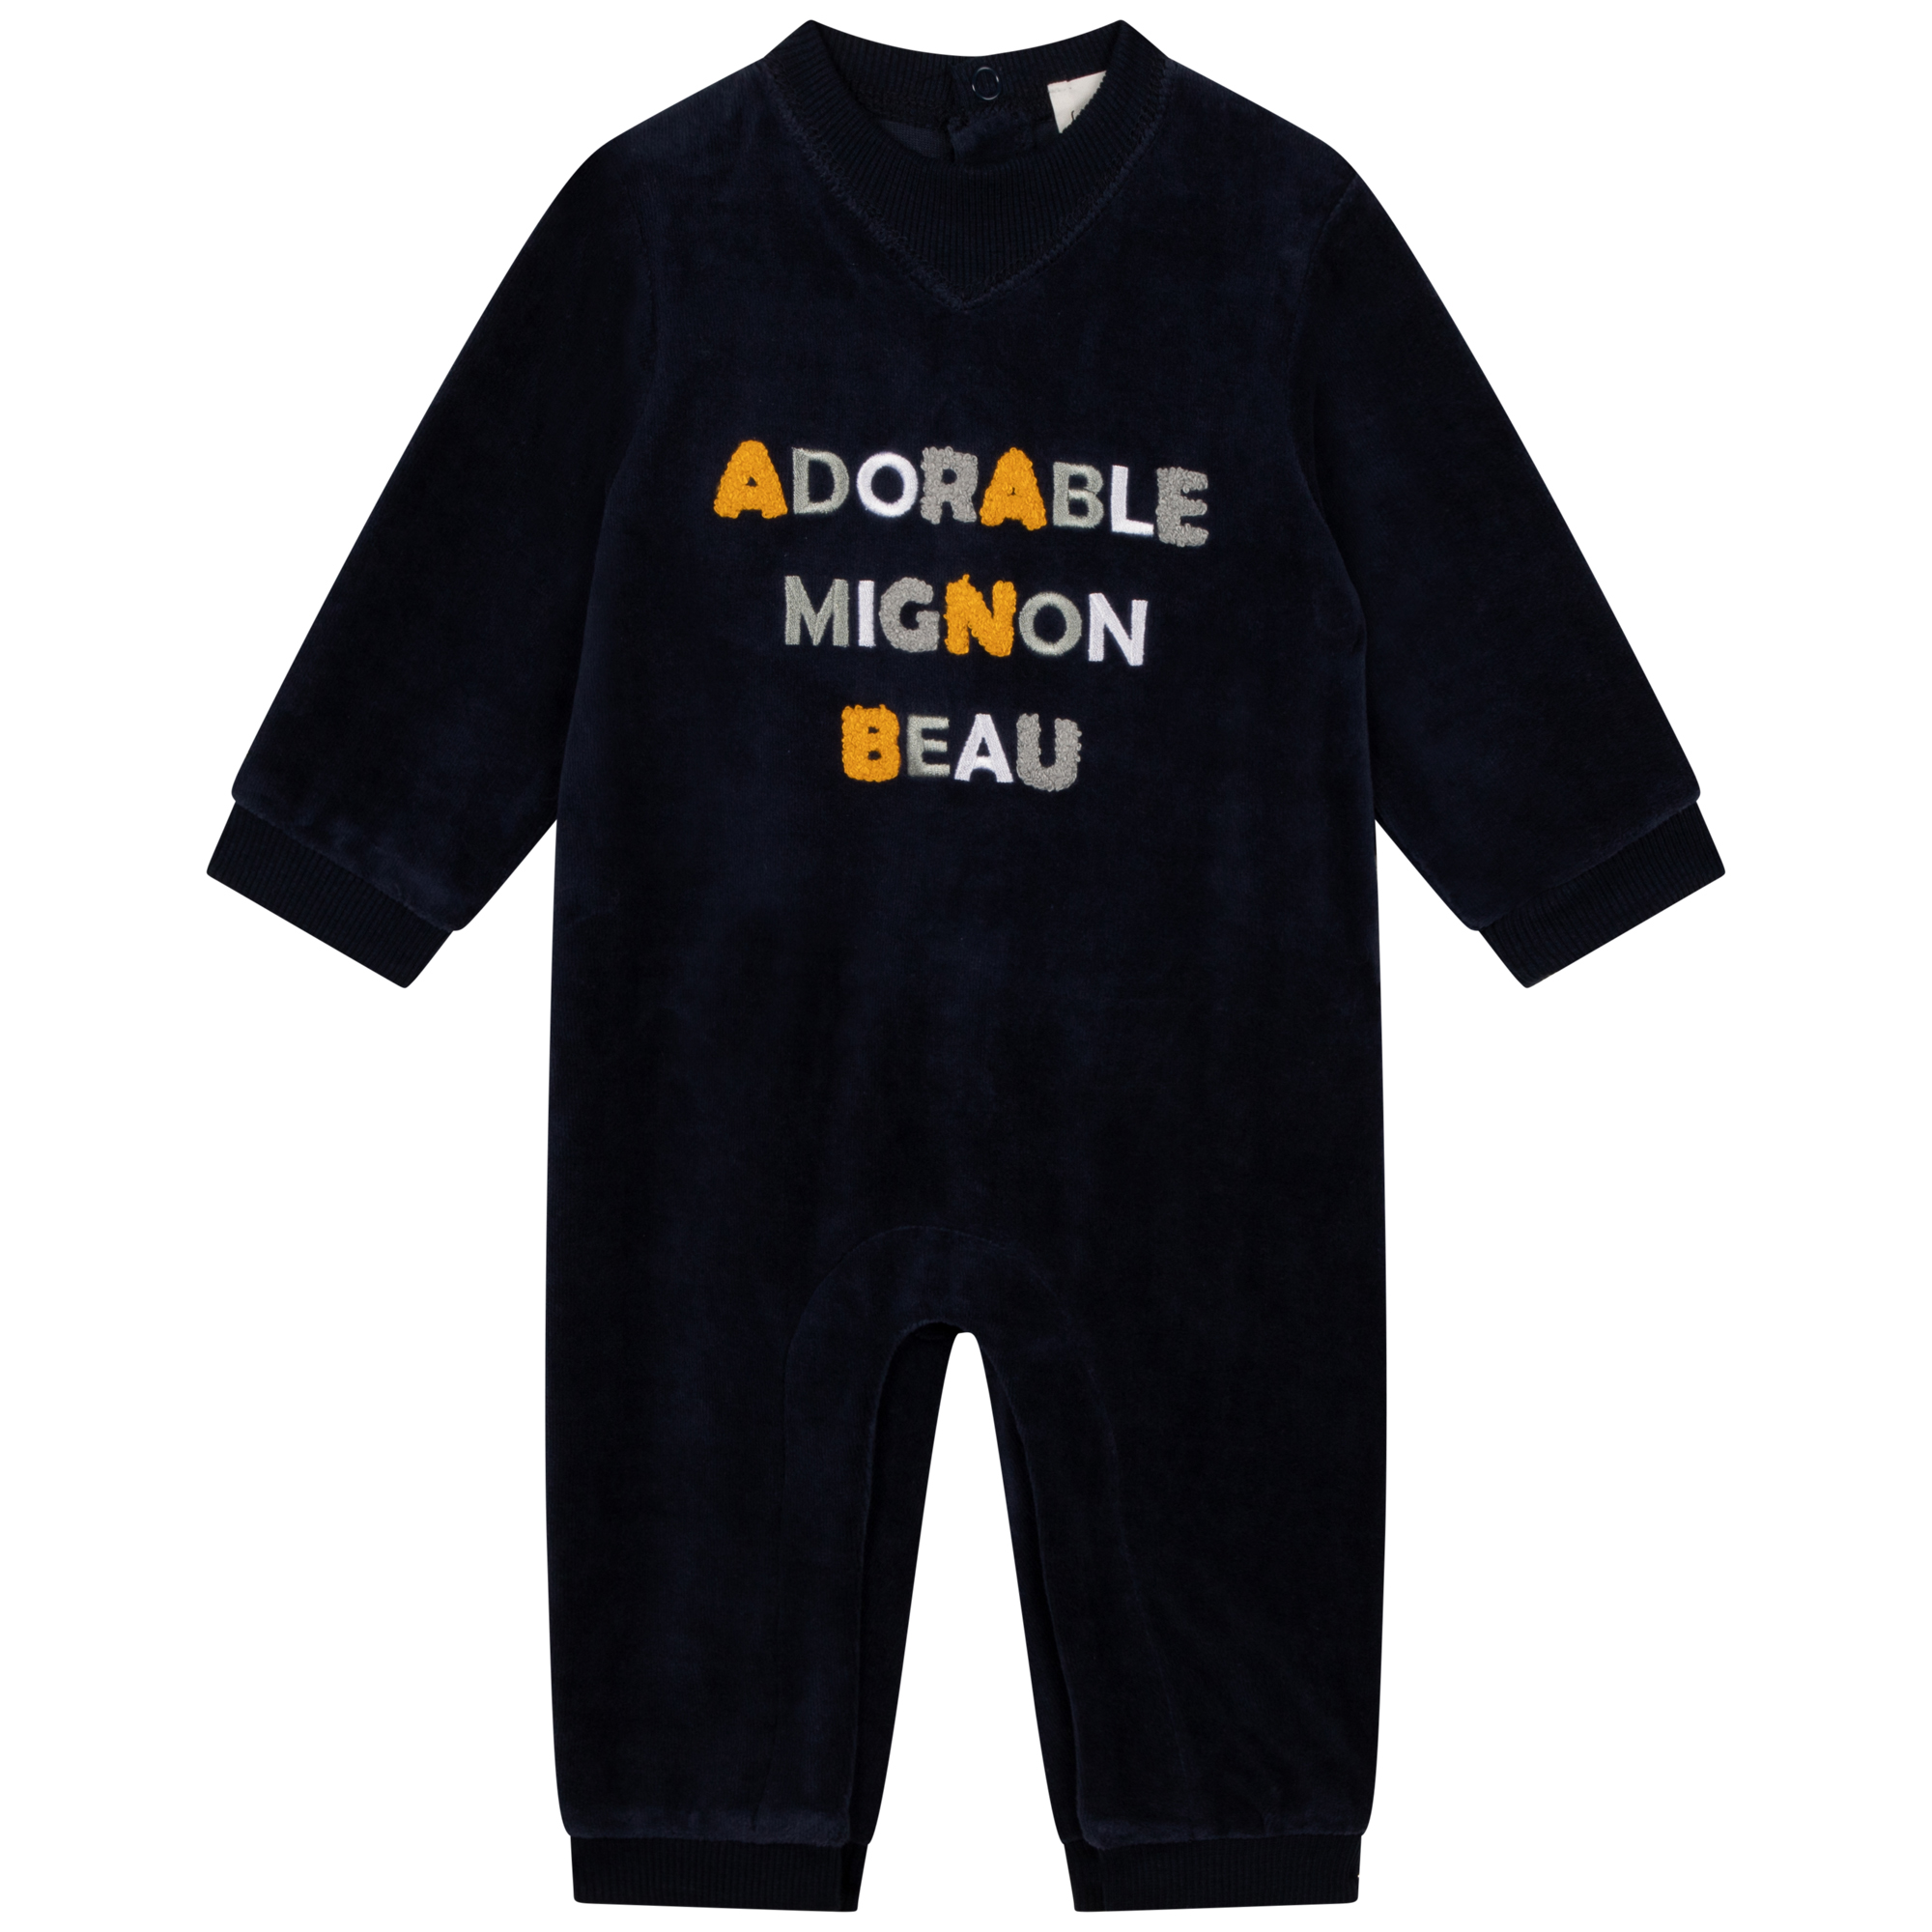 Velvet embroidered playsuit CARREMENT BEAU for BOY